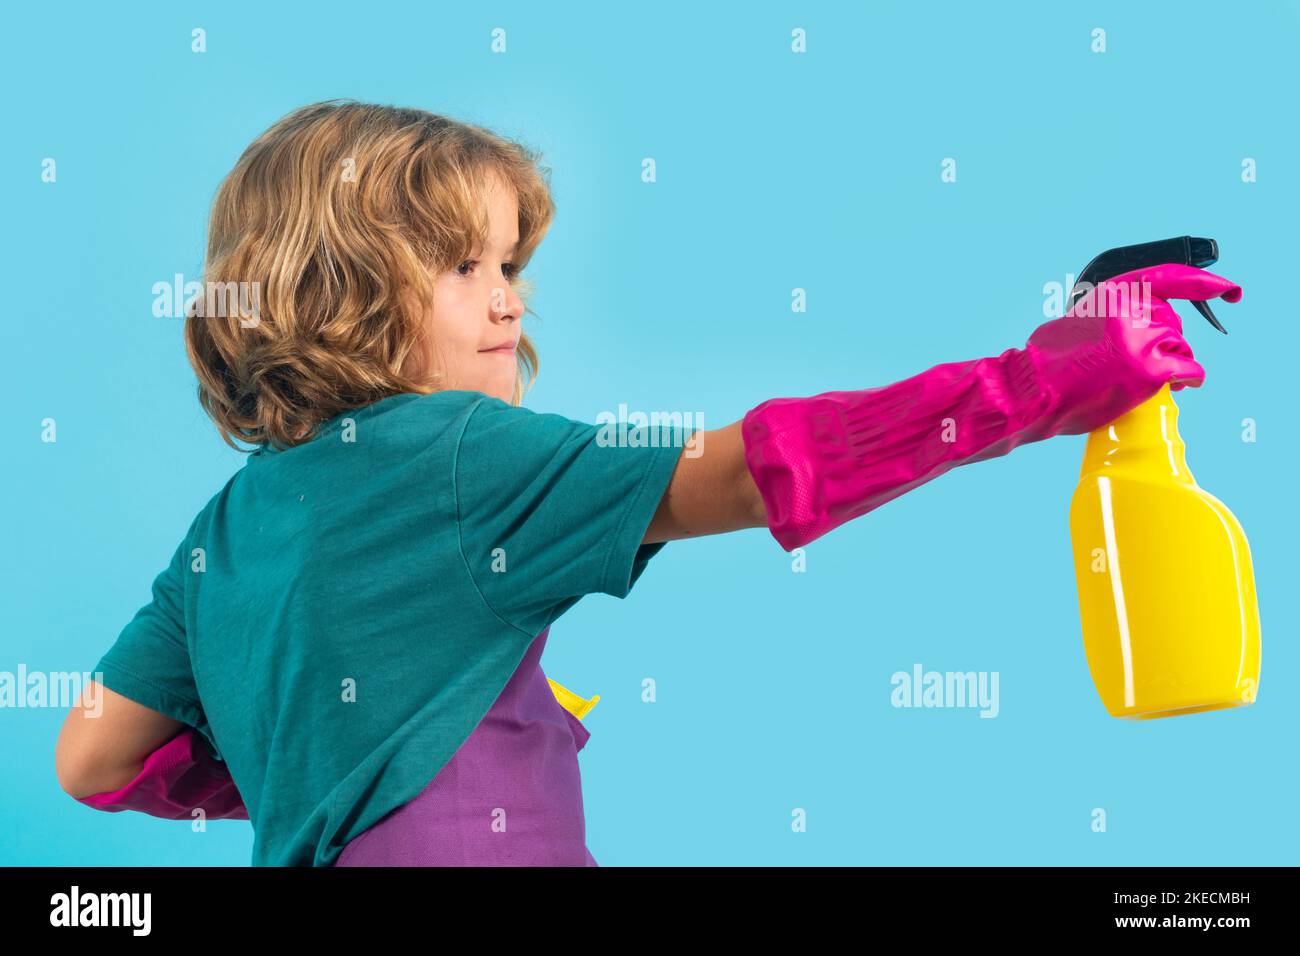 Child doing housework. Studio portrait of child use duster and gloves for cleaning. Funny child mopping house. Cleaning accessory, cleaning supplies Stock Photo